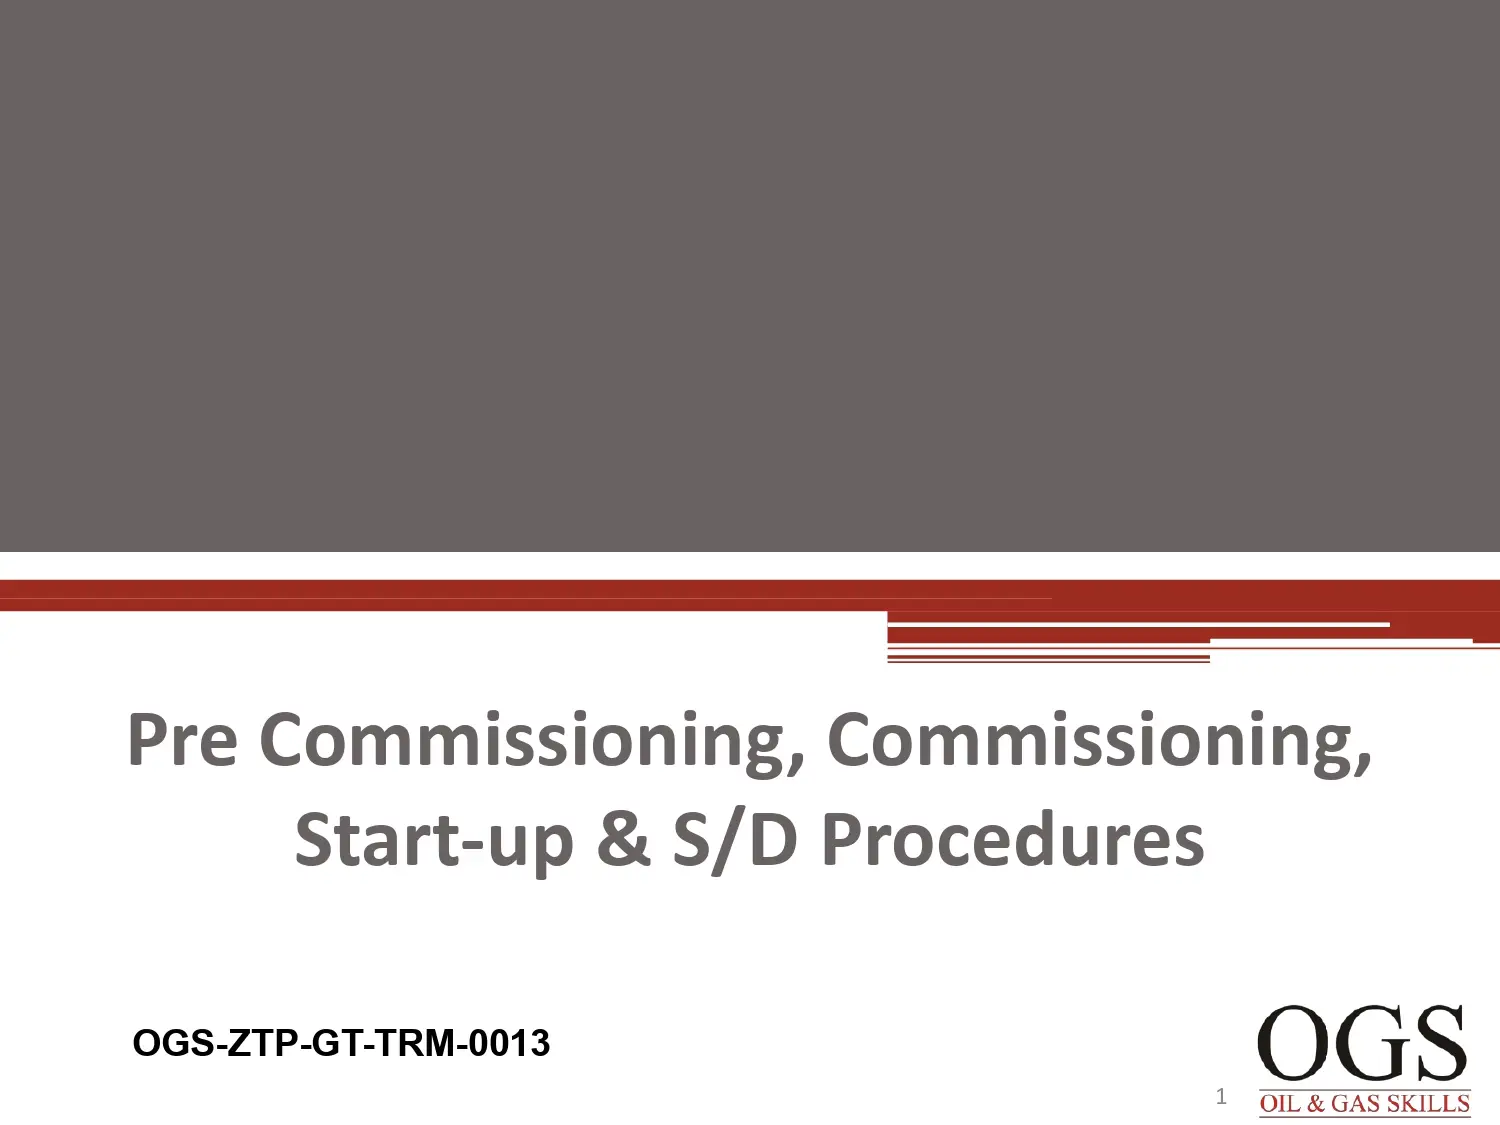 Pre Commissioning, Commissioning, Start-up & S/D Procedures